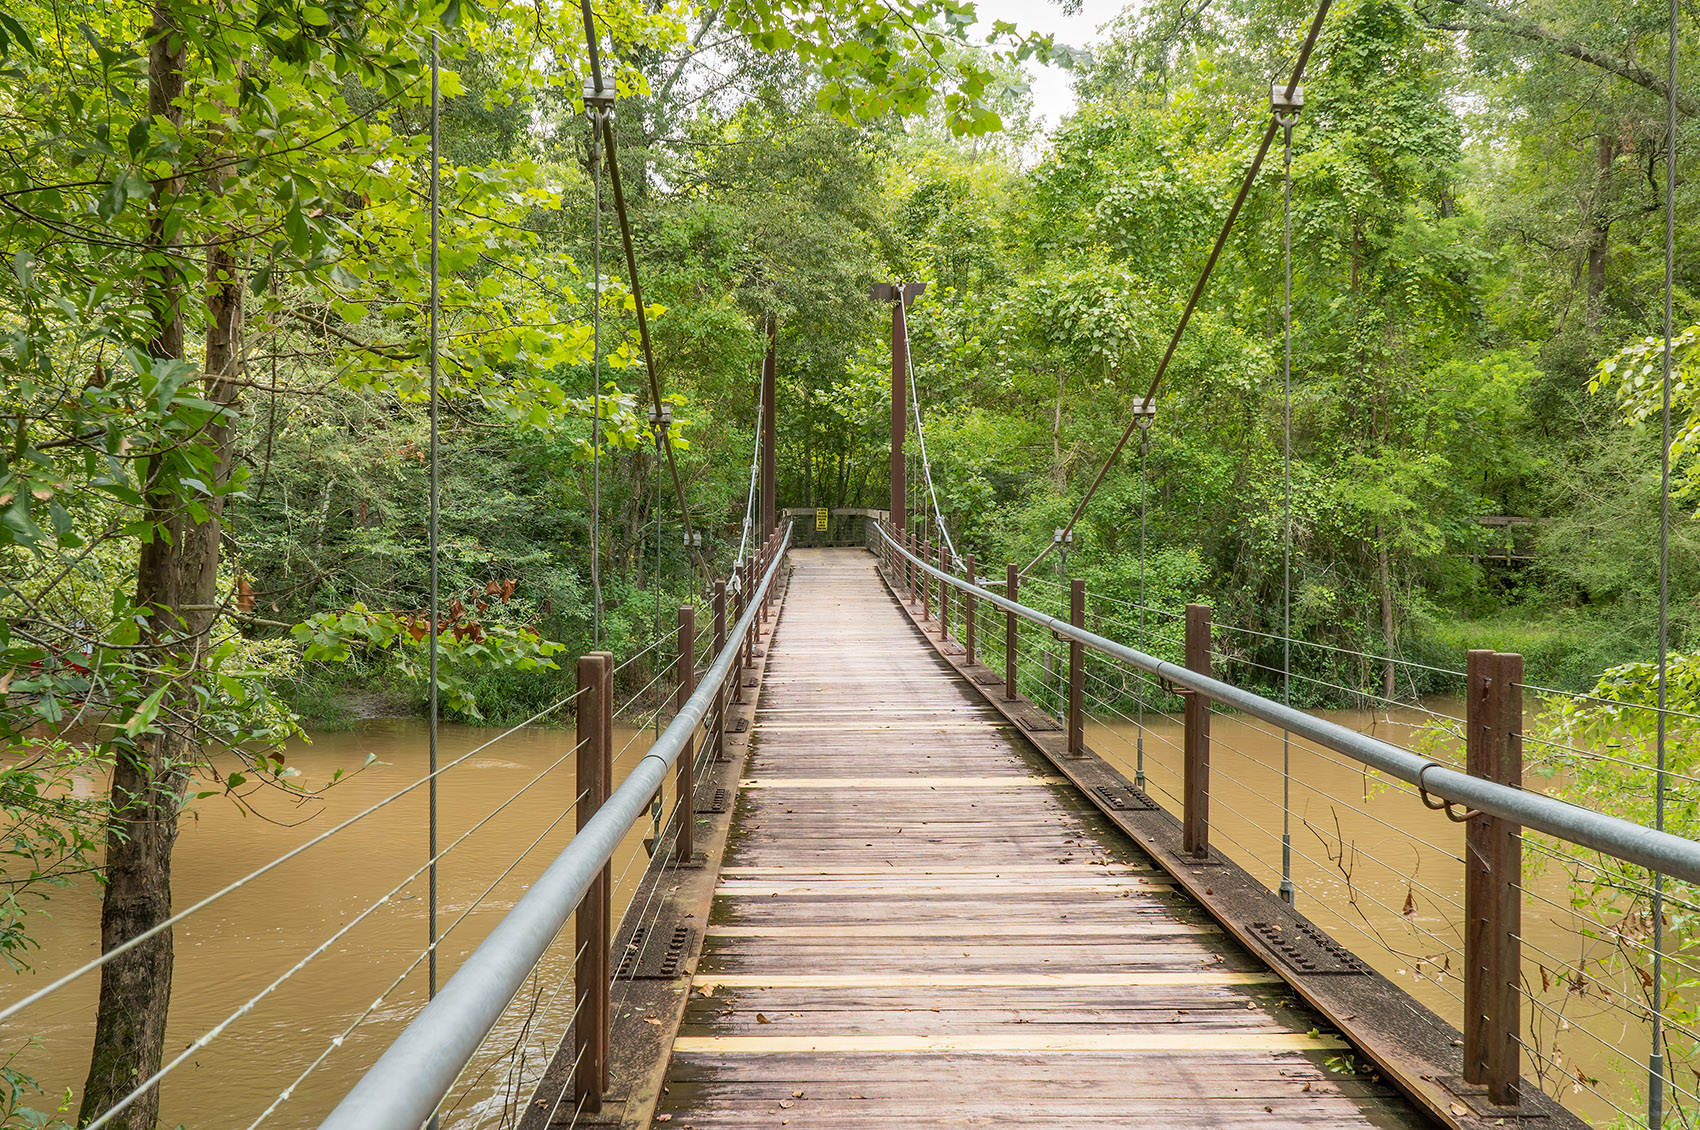 suspention bridge in forest over river in Tickfaw State Park